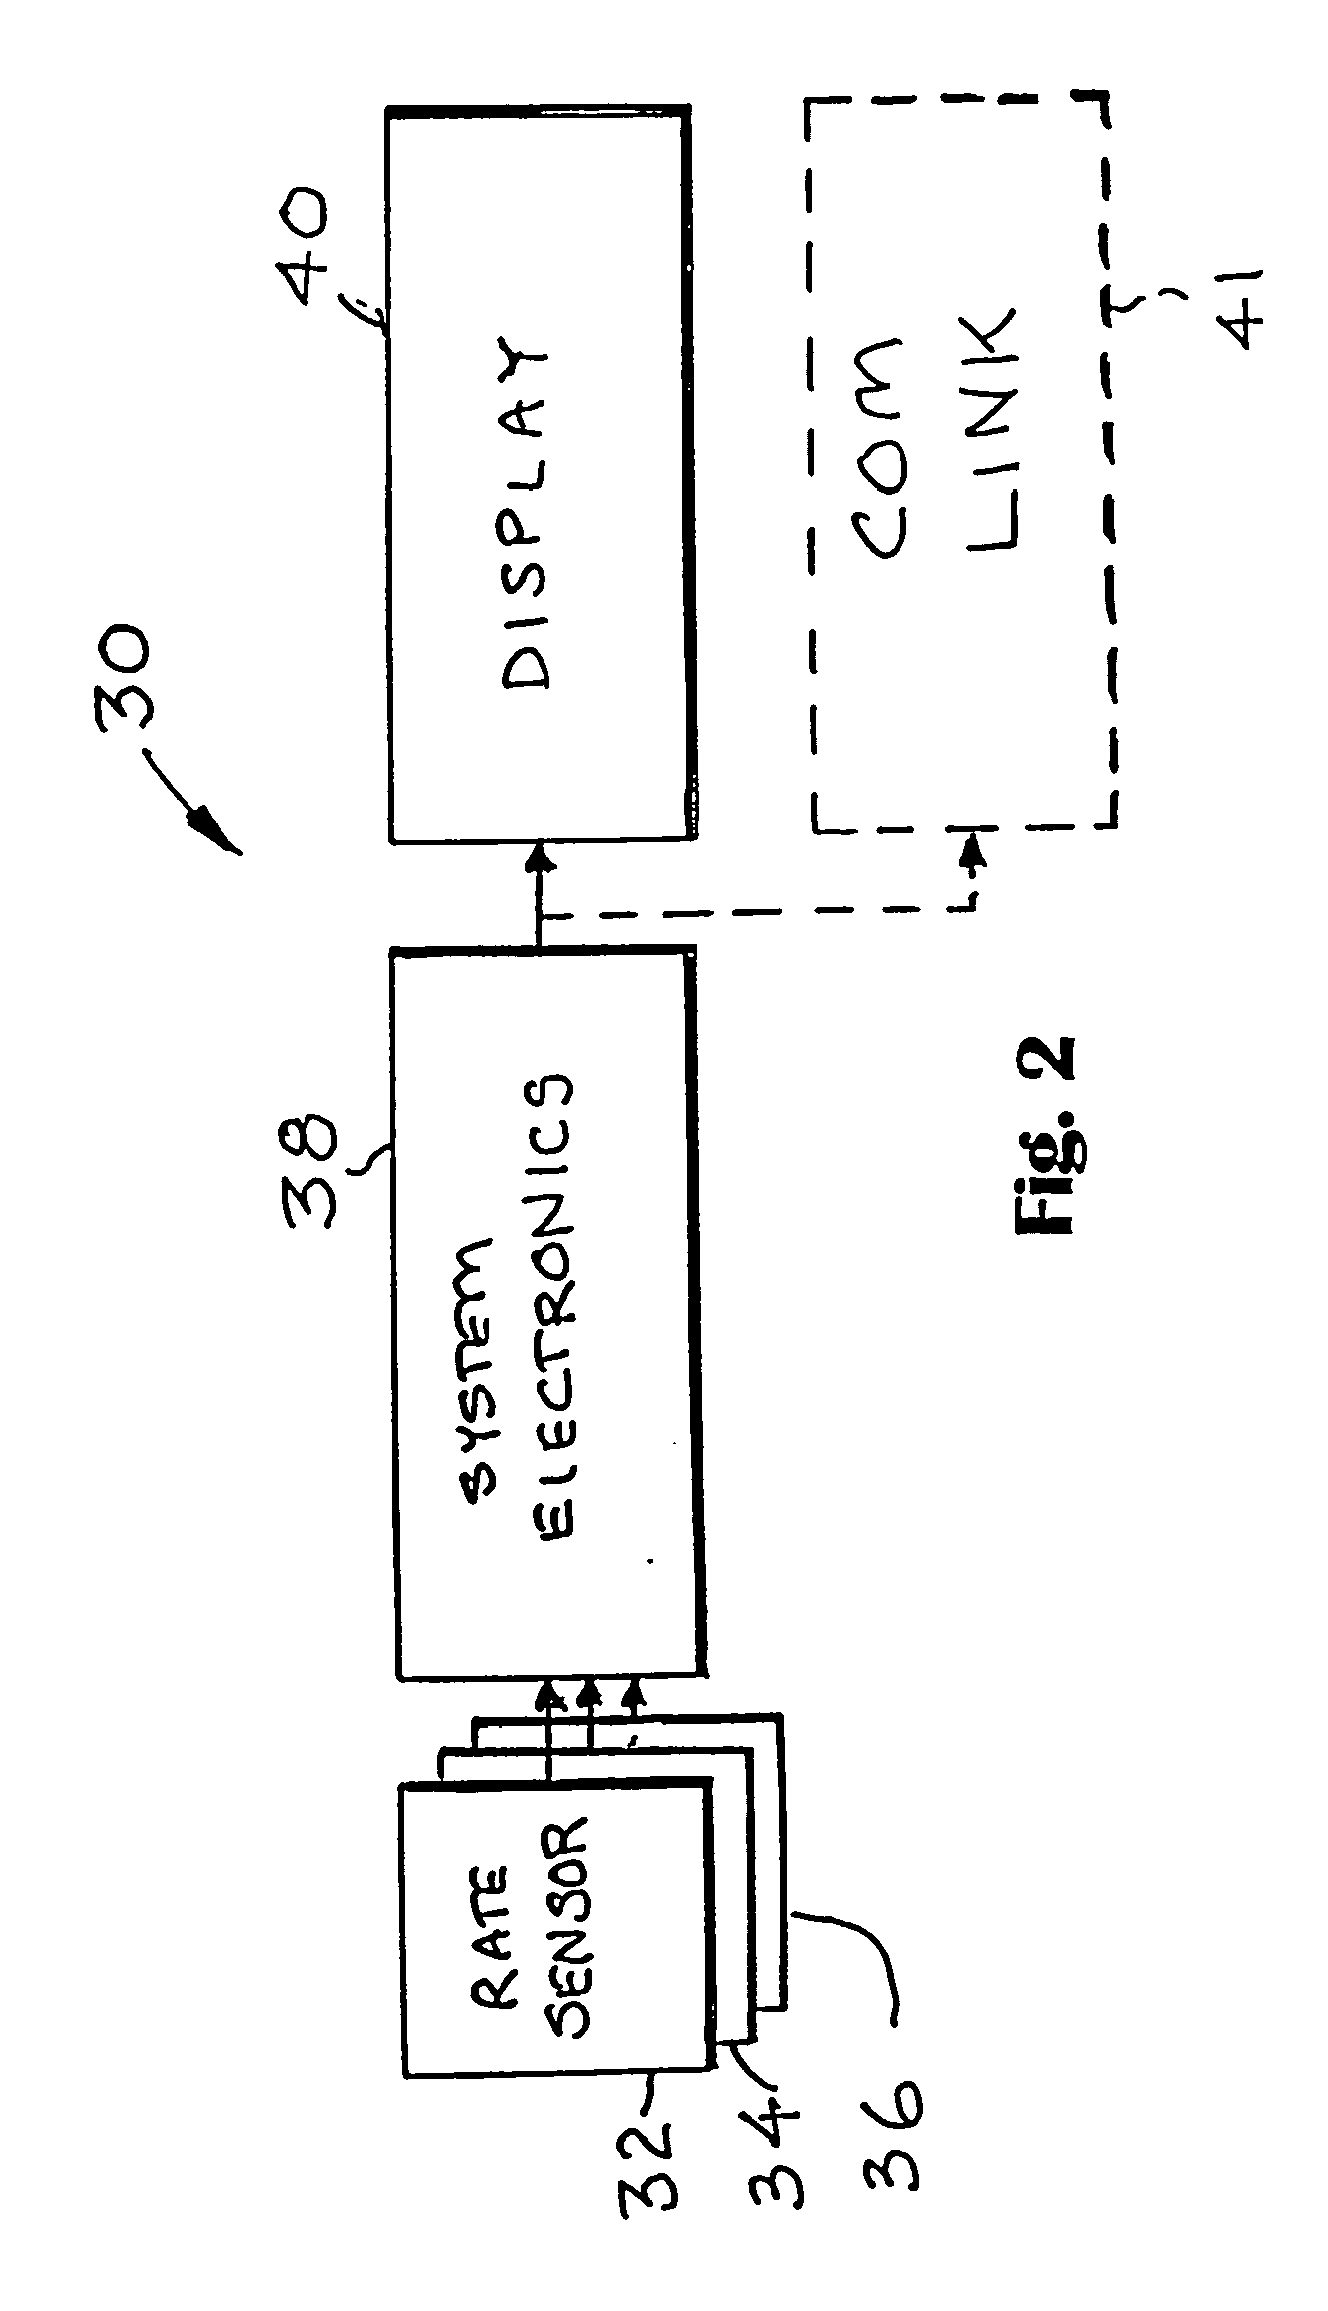 Surgical orientation system and method